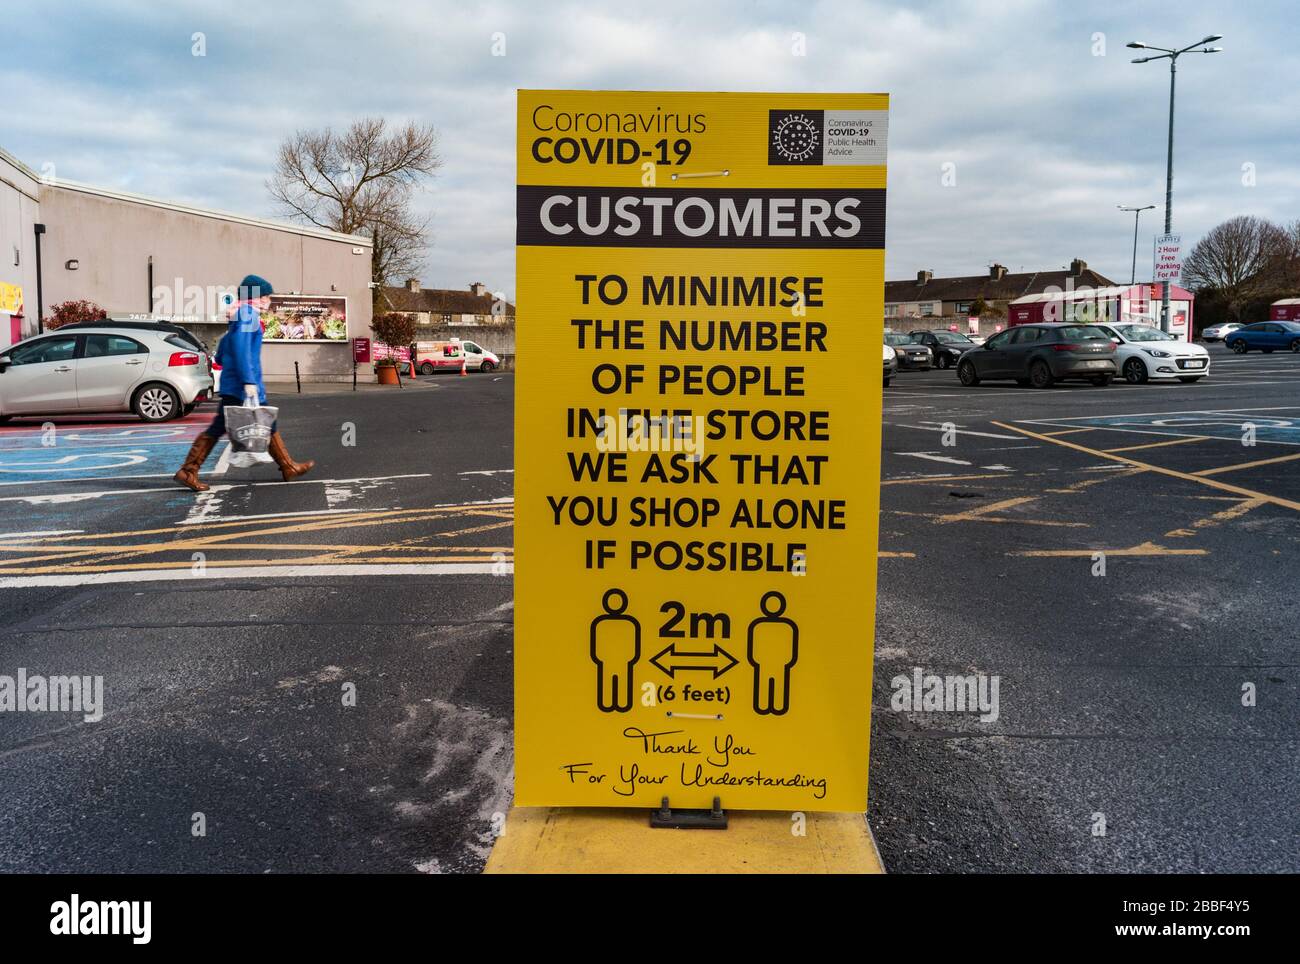 Listowel, Ireland - 30th March 2020:  Covid-19 Sign at entrance to supermarket car park warning customers of social distancing rules of 2 meters Stock Photo